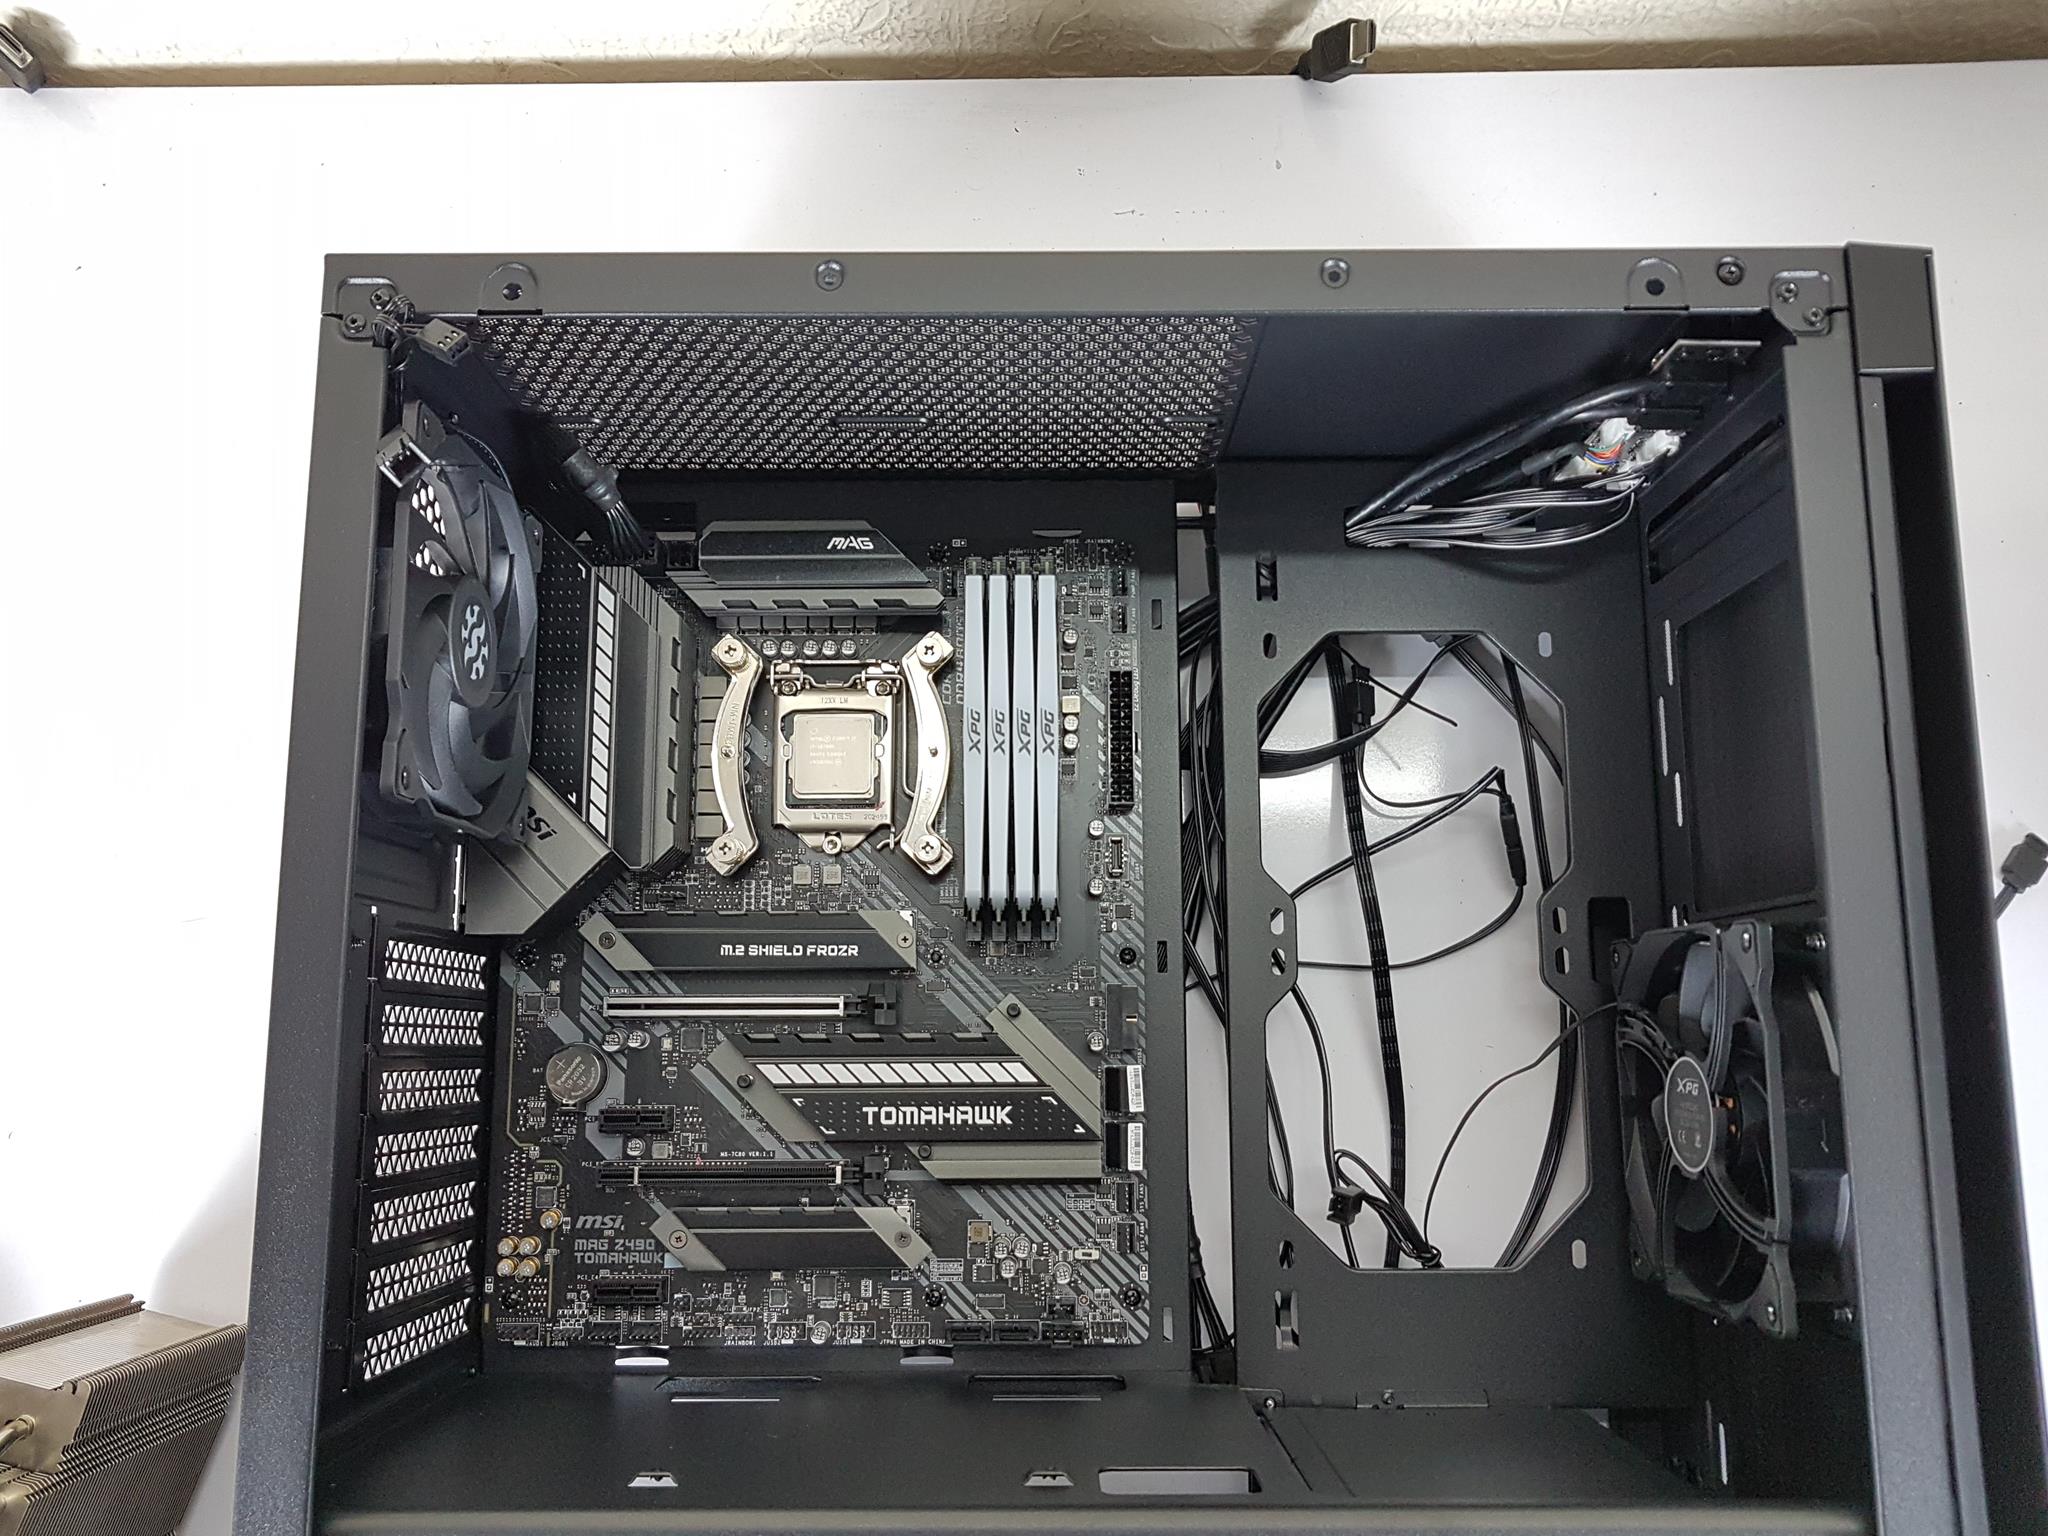 xpg case Test Build and Experience